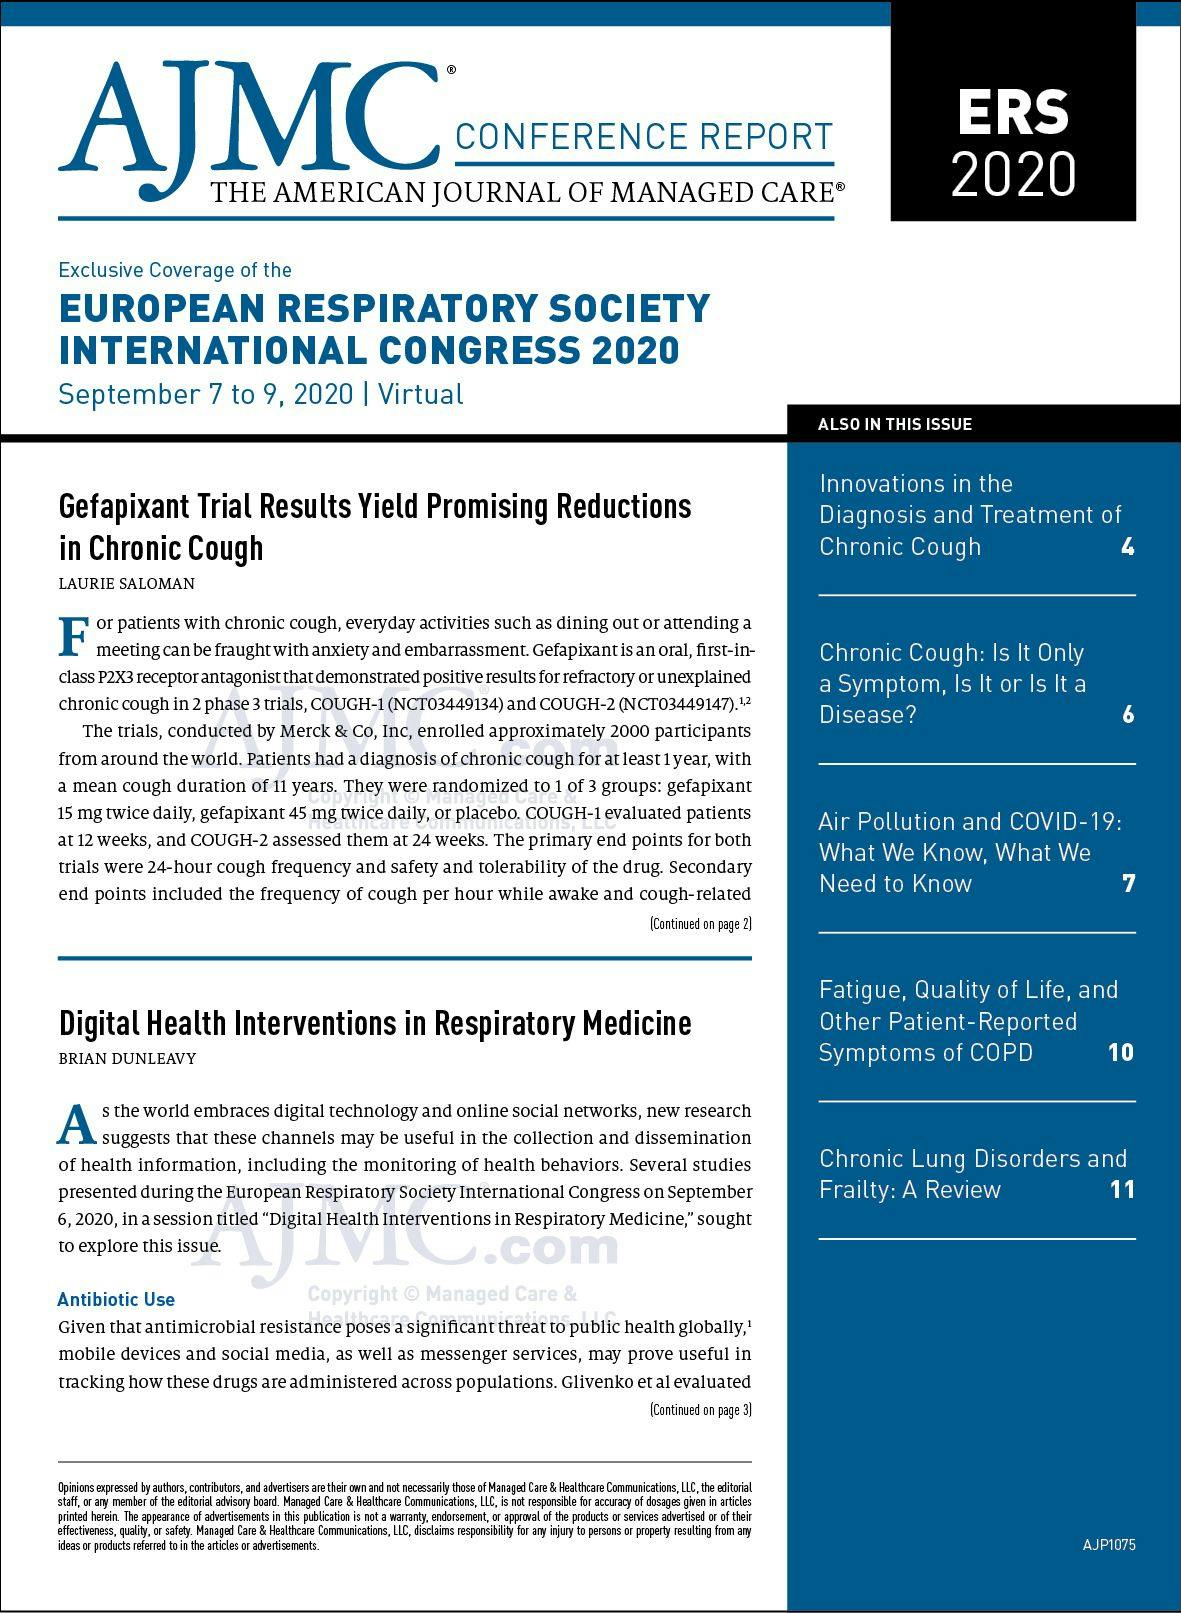 Exclusive Coverage of the European Respiratory Society International Congress 2020